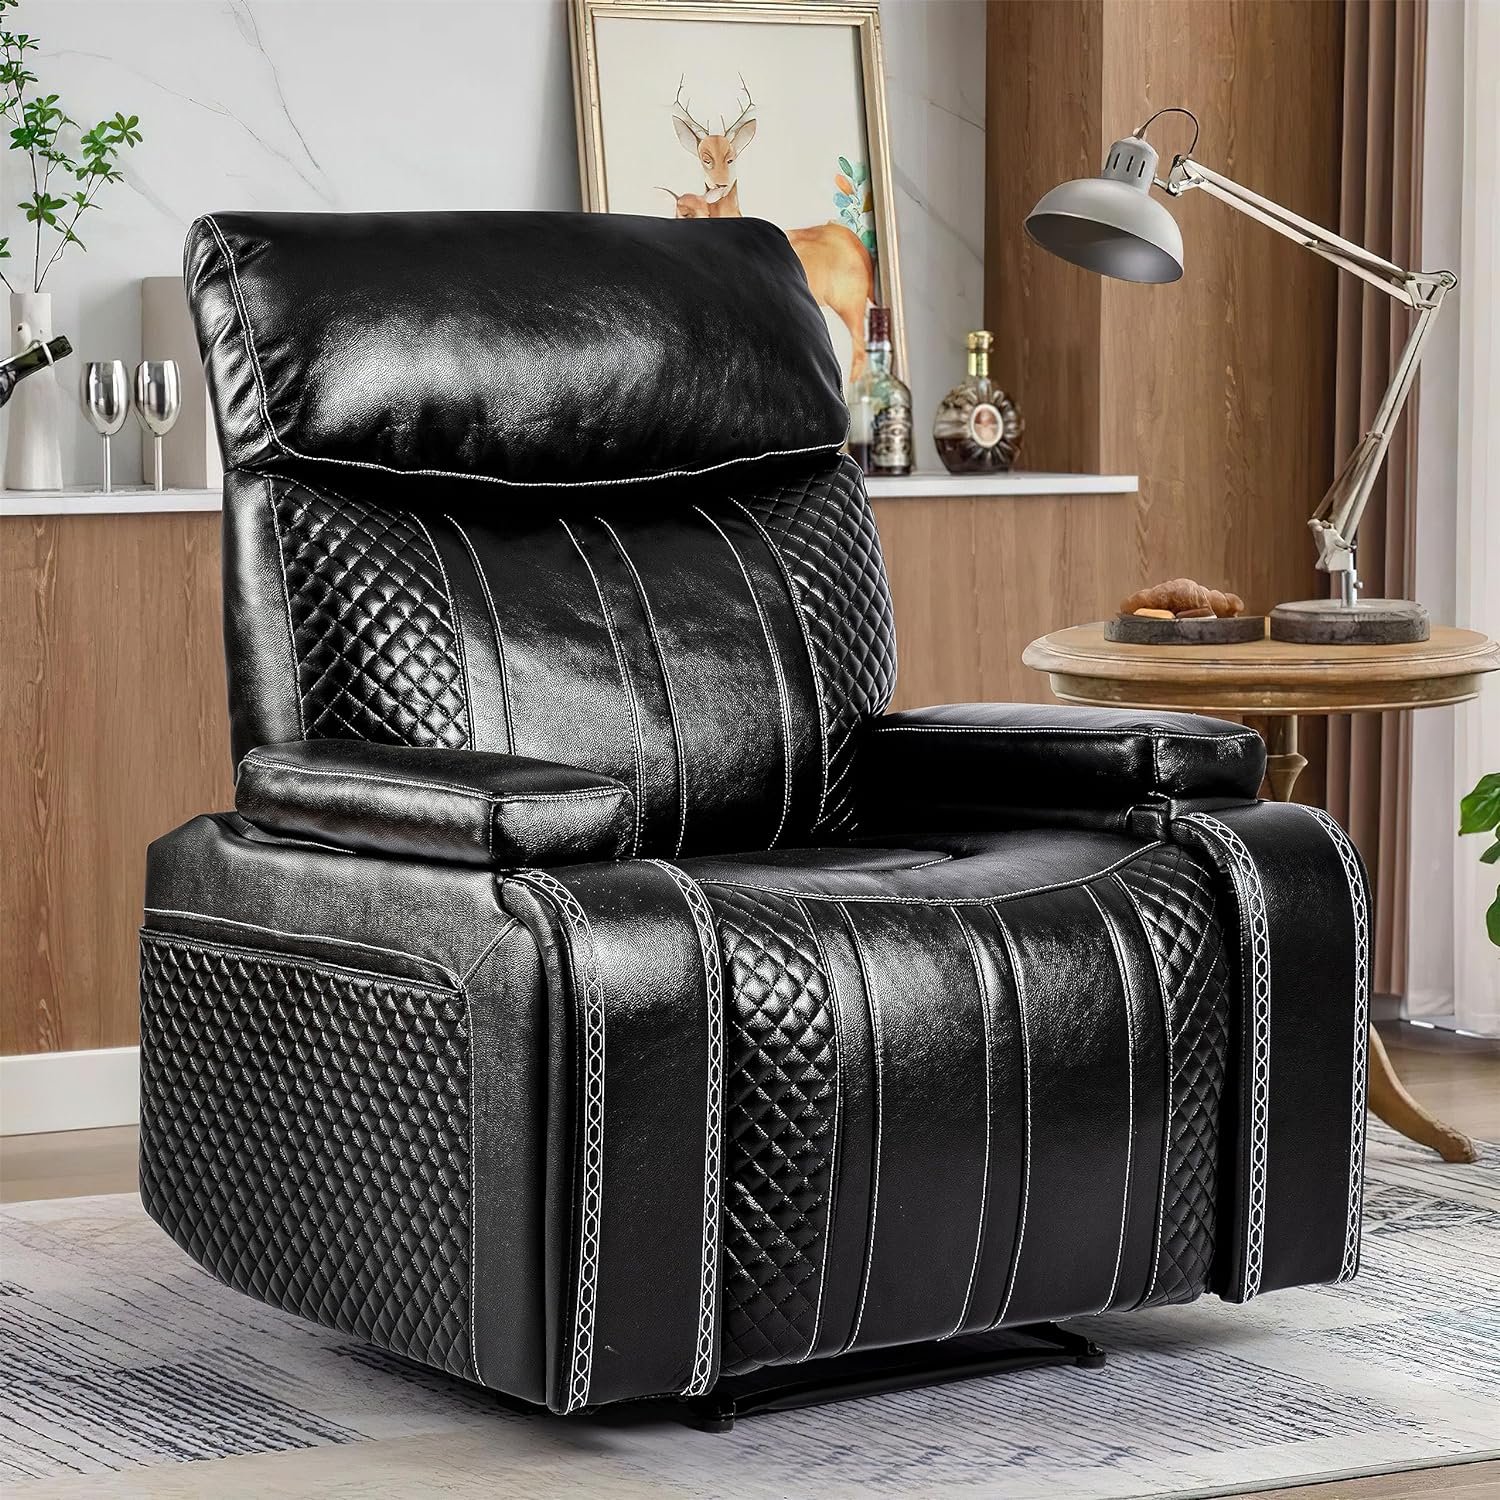 Full Body Massage Chair with Zero Gravity Recliner,with Two Control Panel: Smart Large Screen  Rotary Switch,spot kneading and Heating,Airbag Coverage,Suitable for Home Office